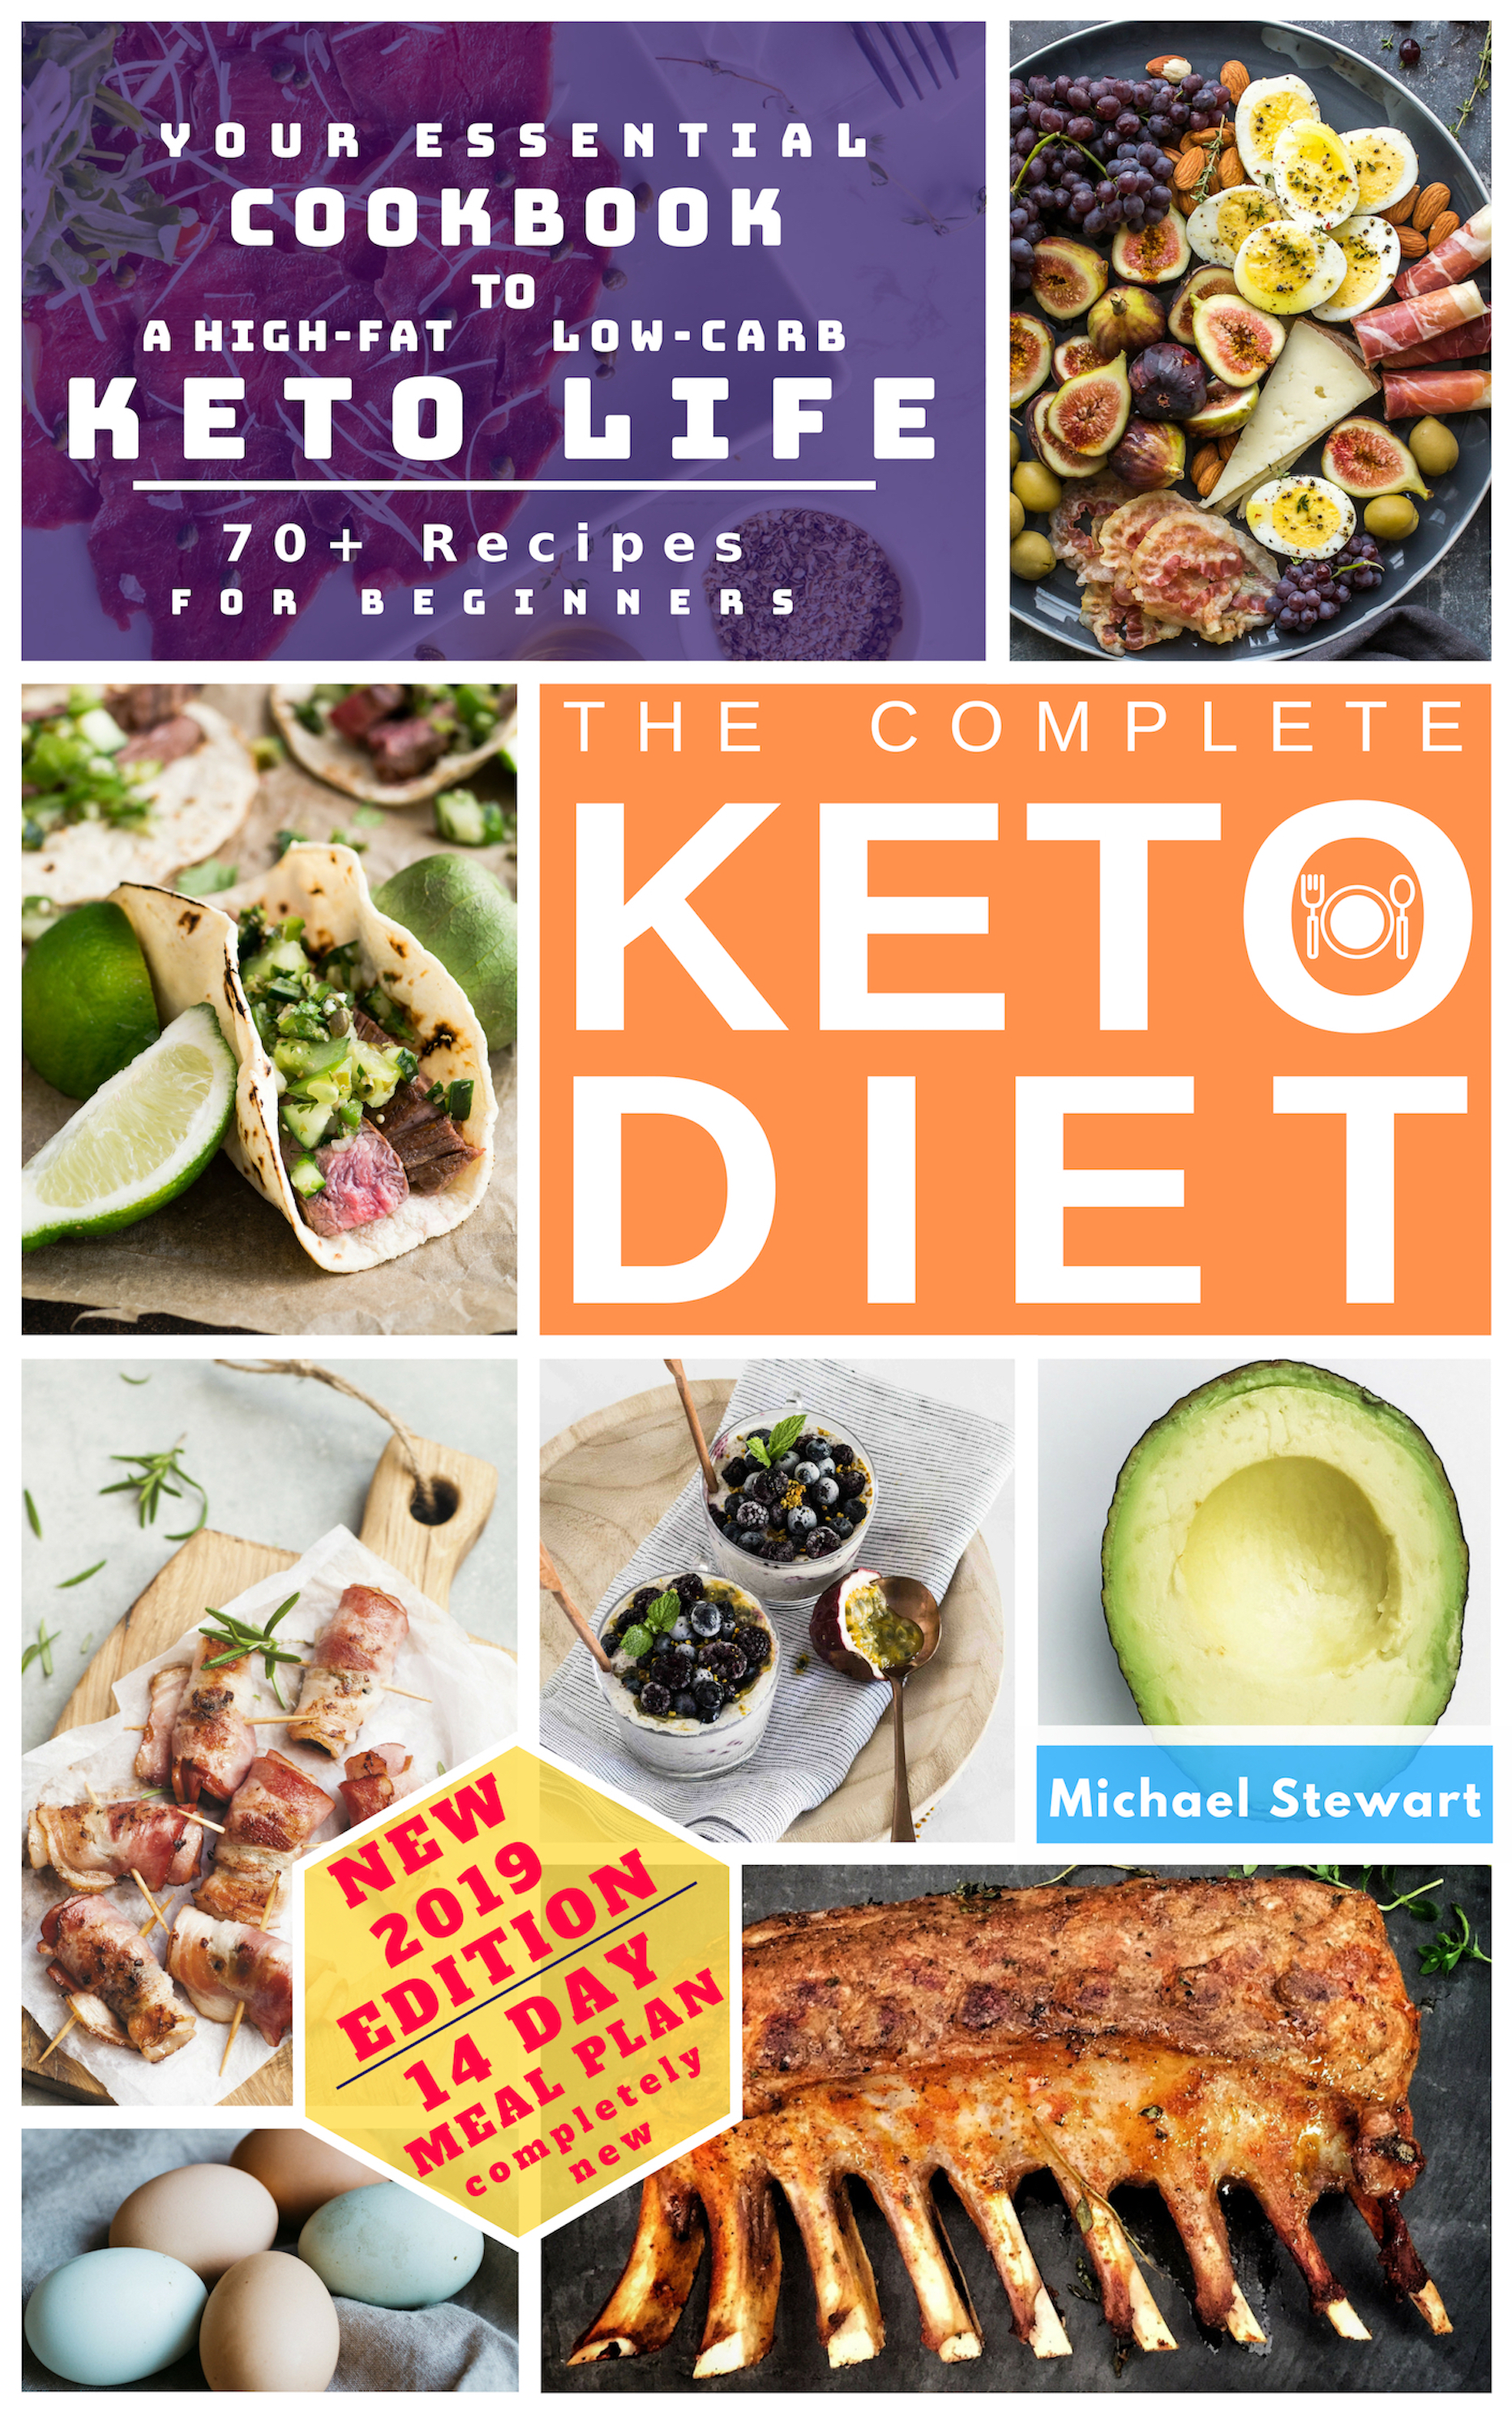 FREE: The Complete Keto Diet for Beginners: Your Essential Cookbook to a High-Low, Low-Carb Keto Life | Completely New 14-Day Meal Plan by MICHAEL STEWART